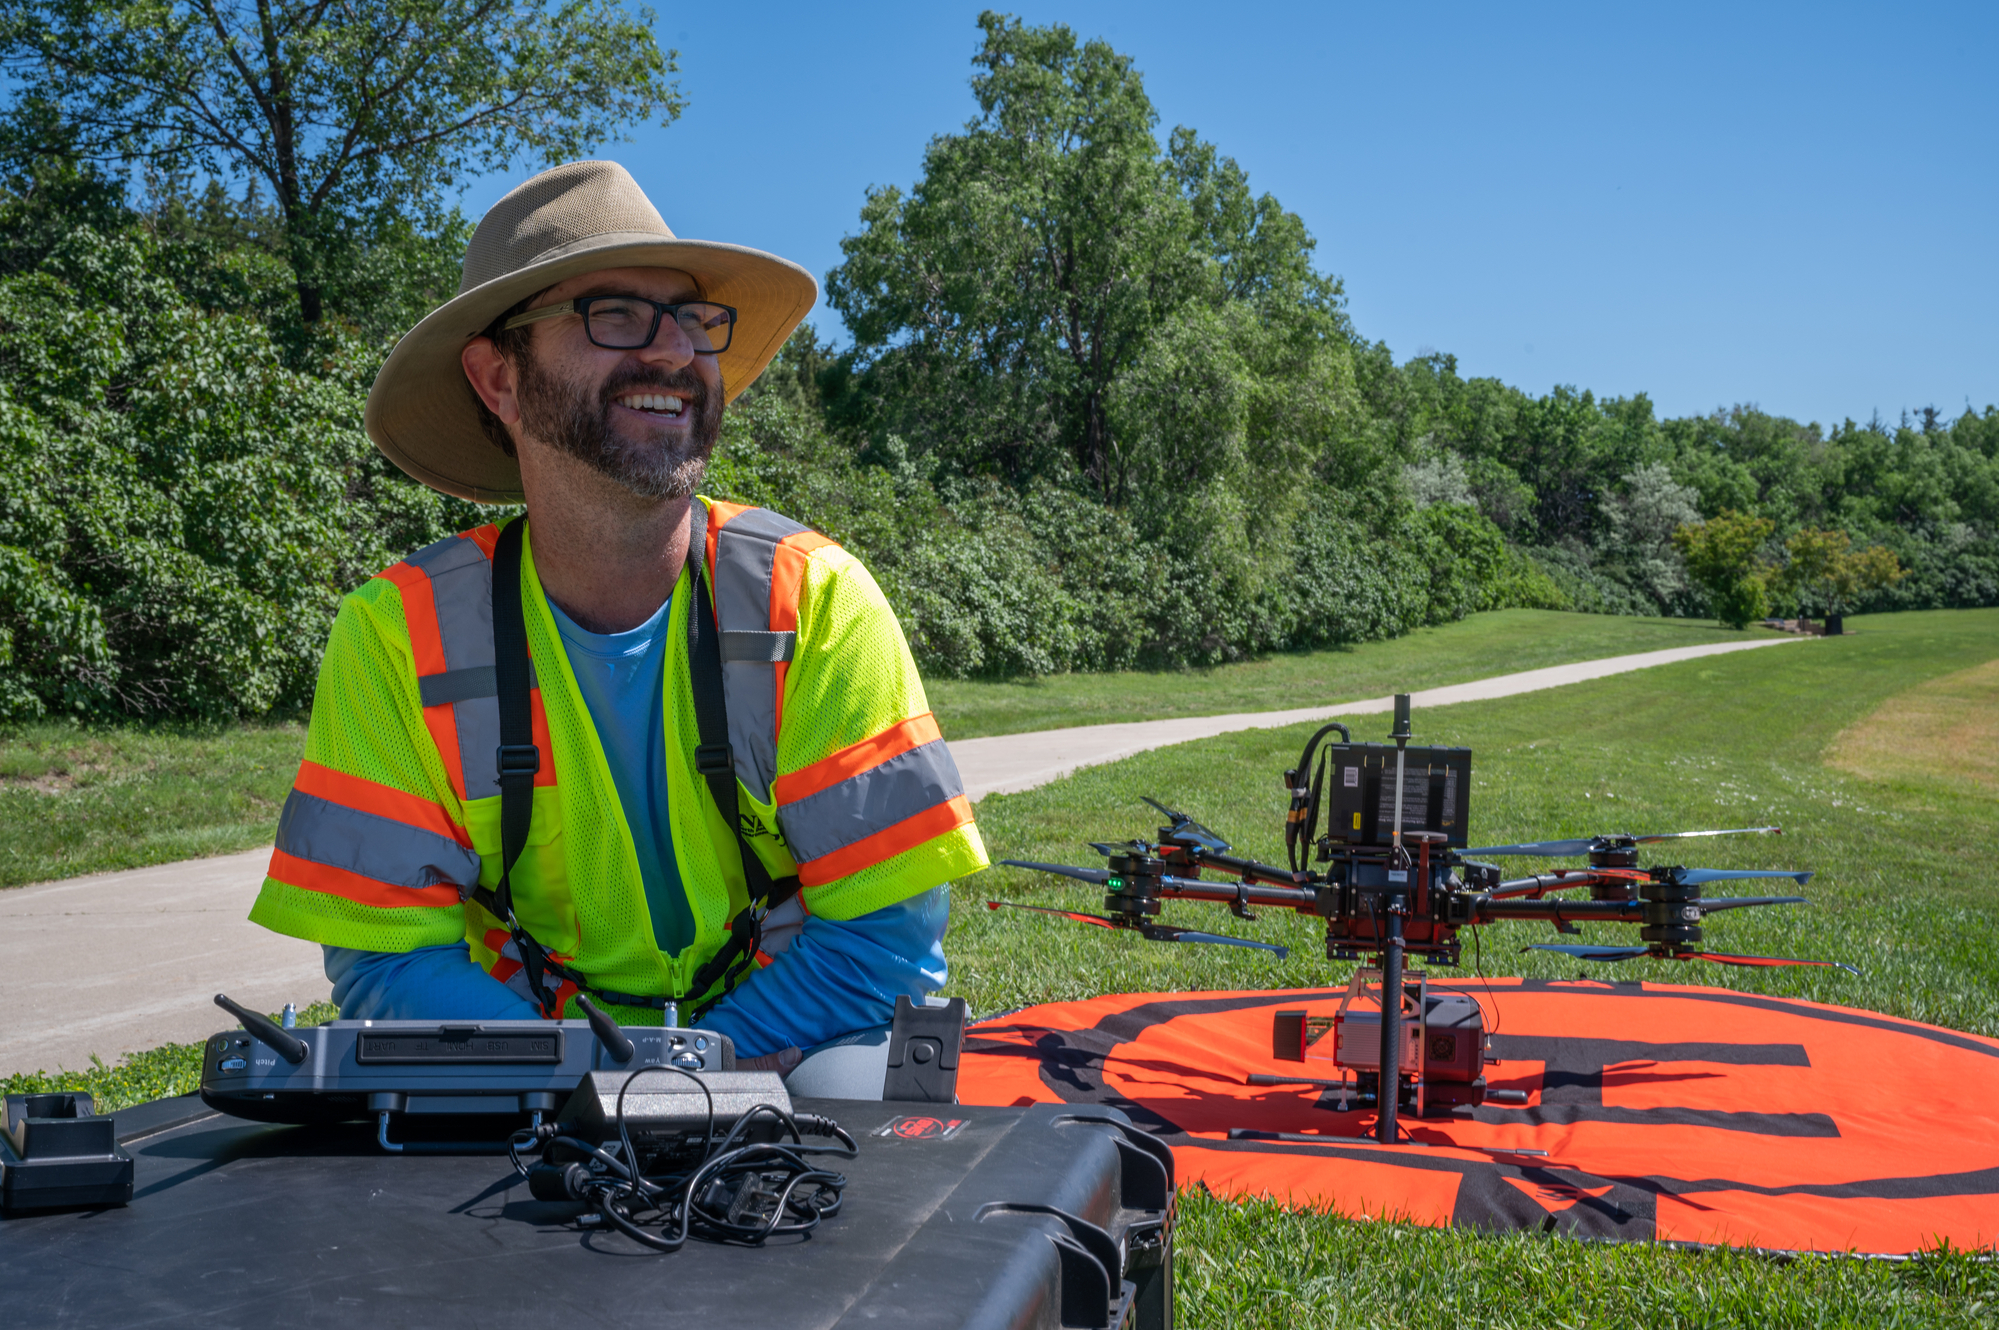 NDDOT PRISM drone equipped with a LiDAR survey unit to map the grounds of the ND State Capitol Building.